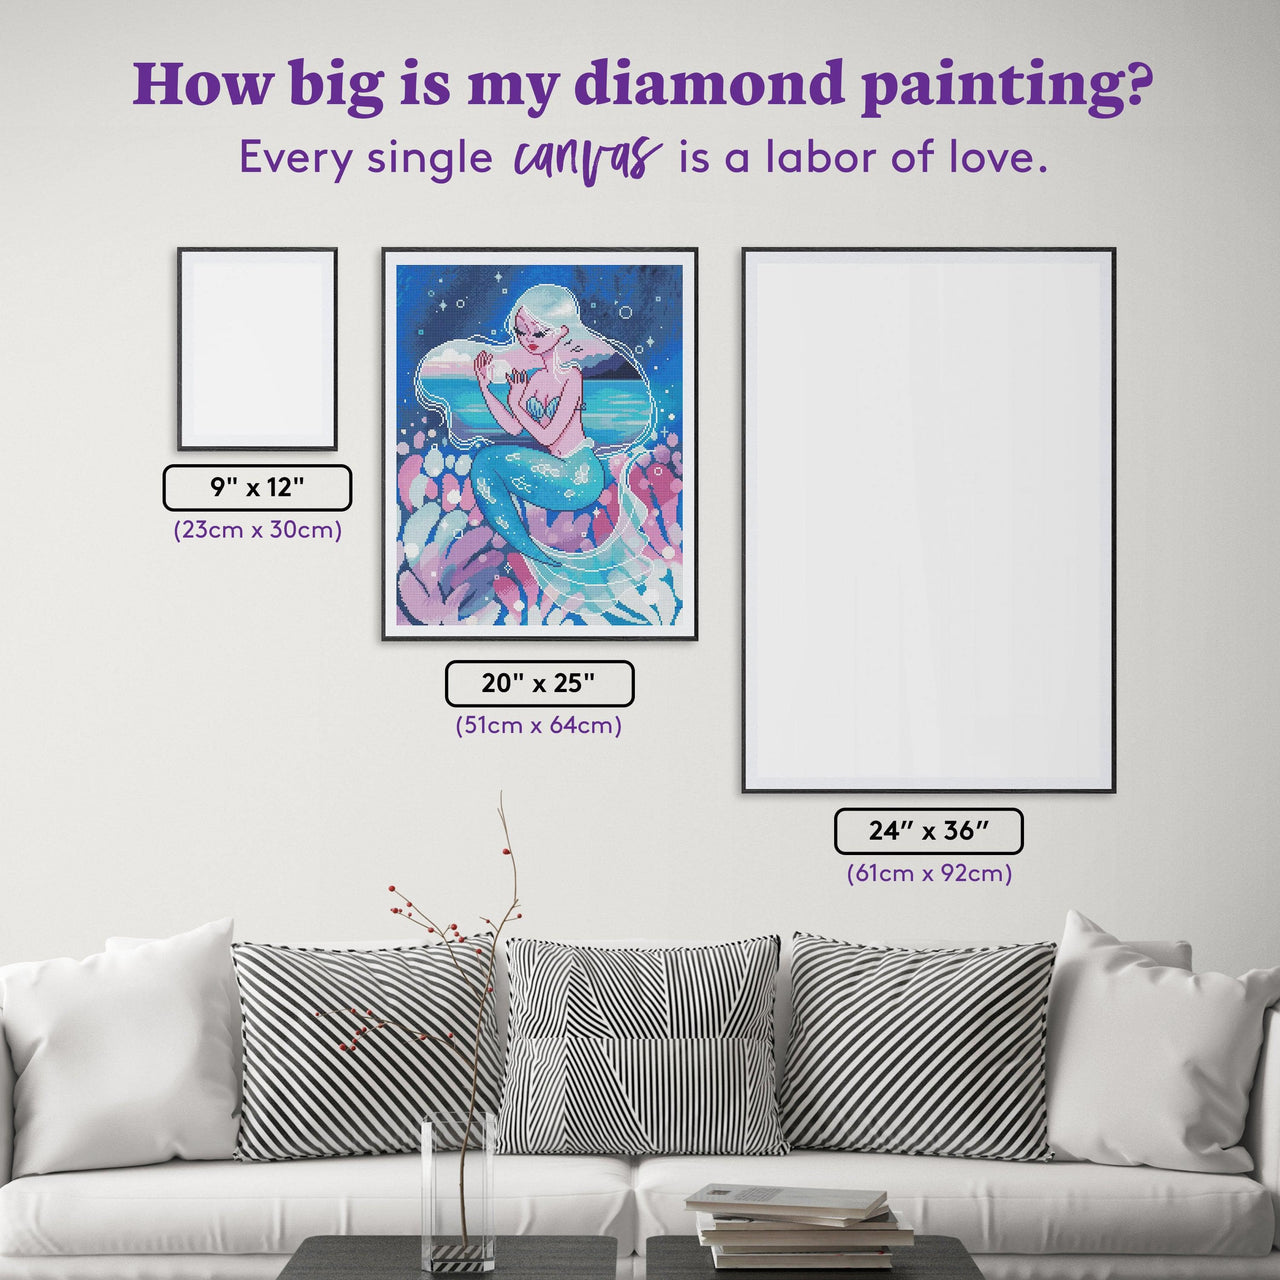 Diamond Painting Bubble 20" x 25" (51cm x 64cm) / Round with 35 Colors including 3 ABs / 41,268